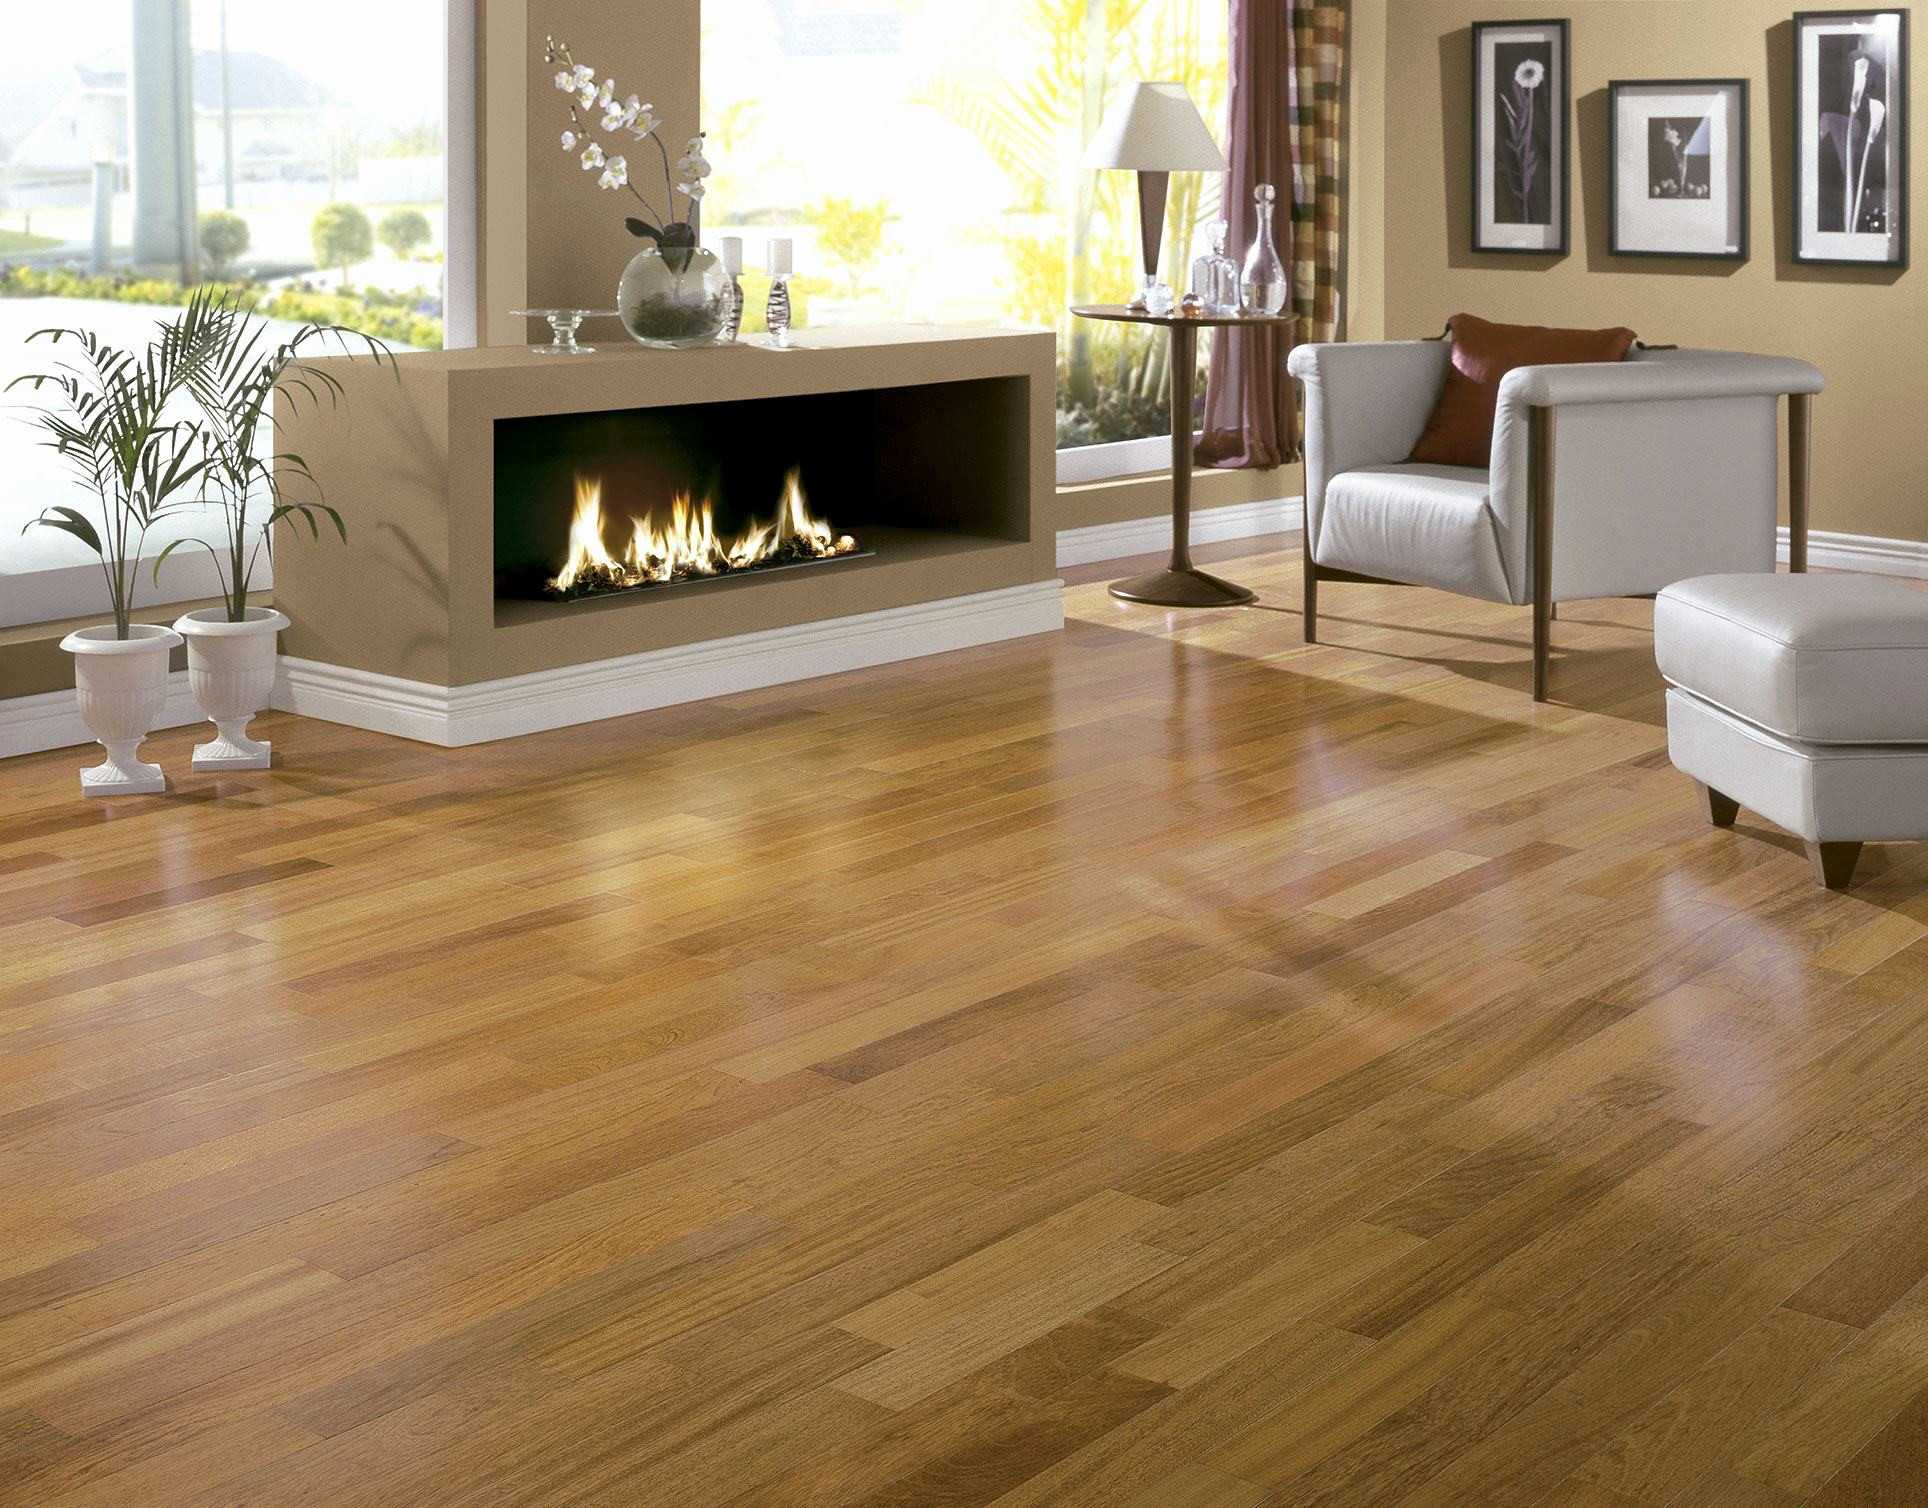 17 Unique is Hardwood Flooring Good for Kitchens 2024 free download is hardwood flooring good for kitchens of white kitchen cabinets with cherry wood floors unique engaging inside white kitchen cabinets with cherry wood floors unique engaging discount hardwo